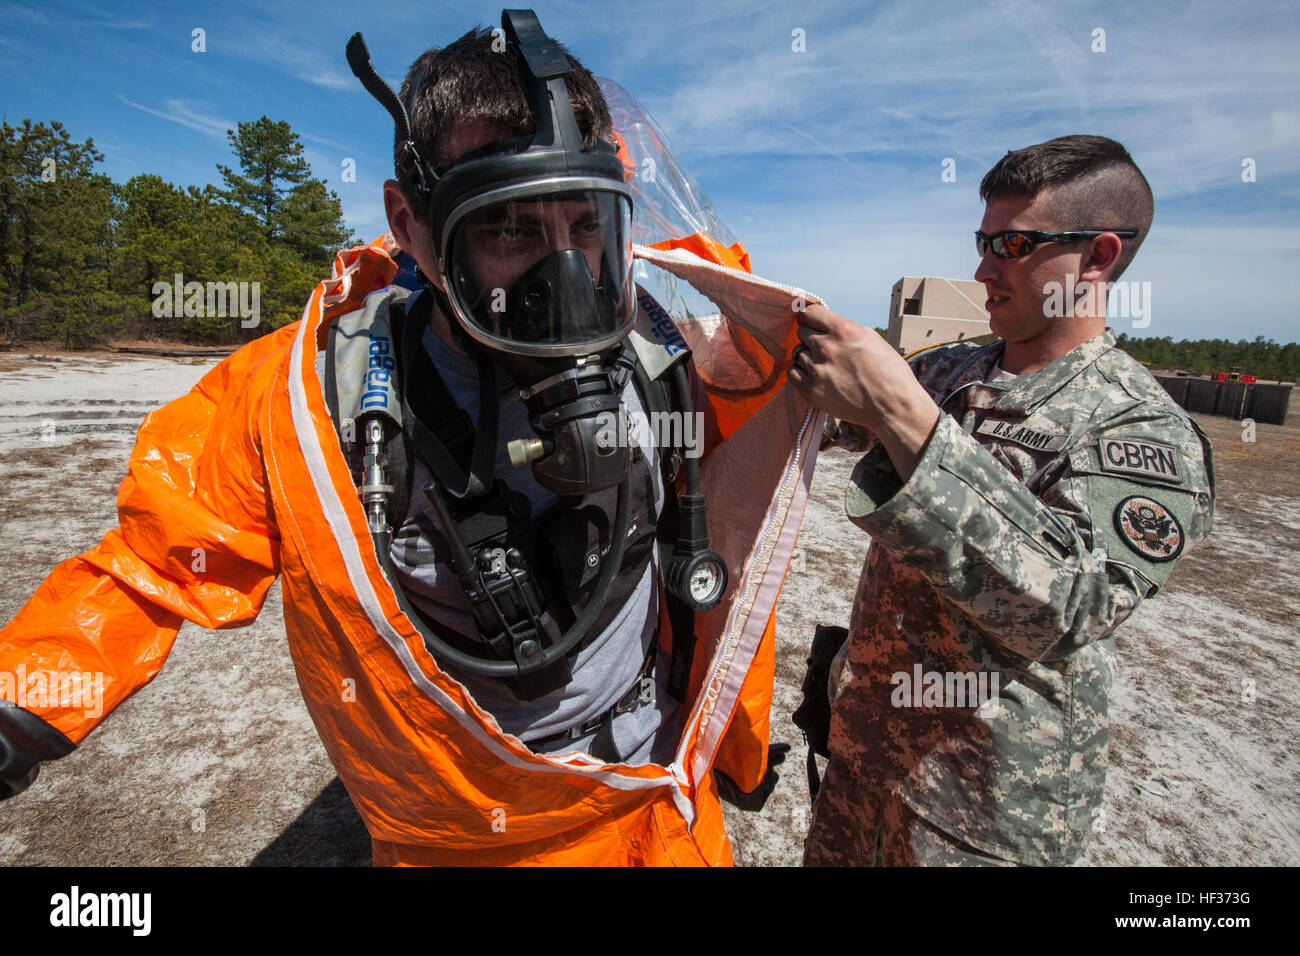 Staff Sgt. Chris M. Maute, right, assists Sgt. 1st Class Steve B. Kovacs, both with the 21st Weapons of Mass Destruction Civil Support Team (WMD CST), New Jersey National Guard, into his Level A Protective Suit during a full-scale Homeland Response Force exercise involving units from the New Jersey and New York Army and Air National Guard at Joint Base McGuire-Dix-Lakehurst, N.J., April 16, 2015. The Chemical, Biological, Radiological and Nuclear (CBRN) portion of the exercise was performed by National Guard Soldiers and Airmen from New Jersey’s 21st Weapons of Mass Destruction Civil Support T Stock Photo